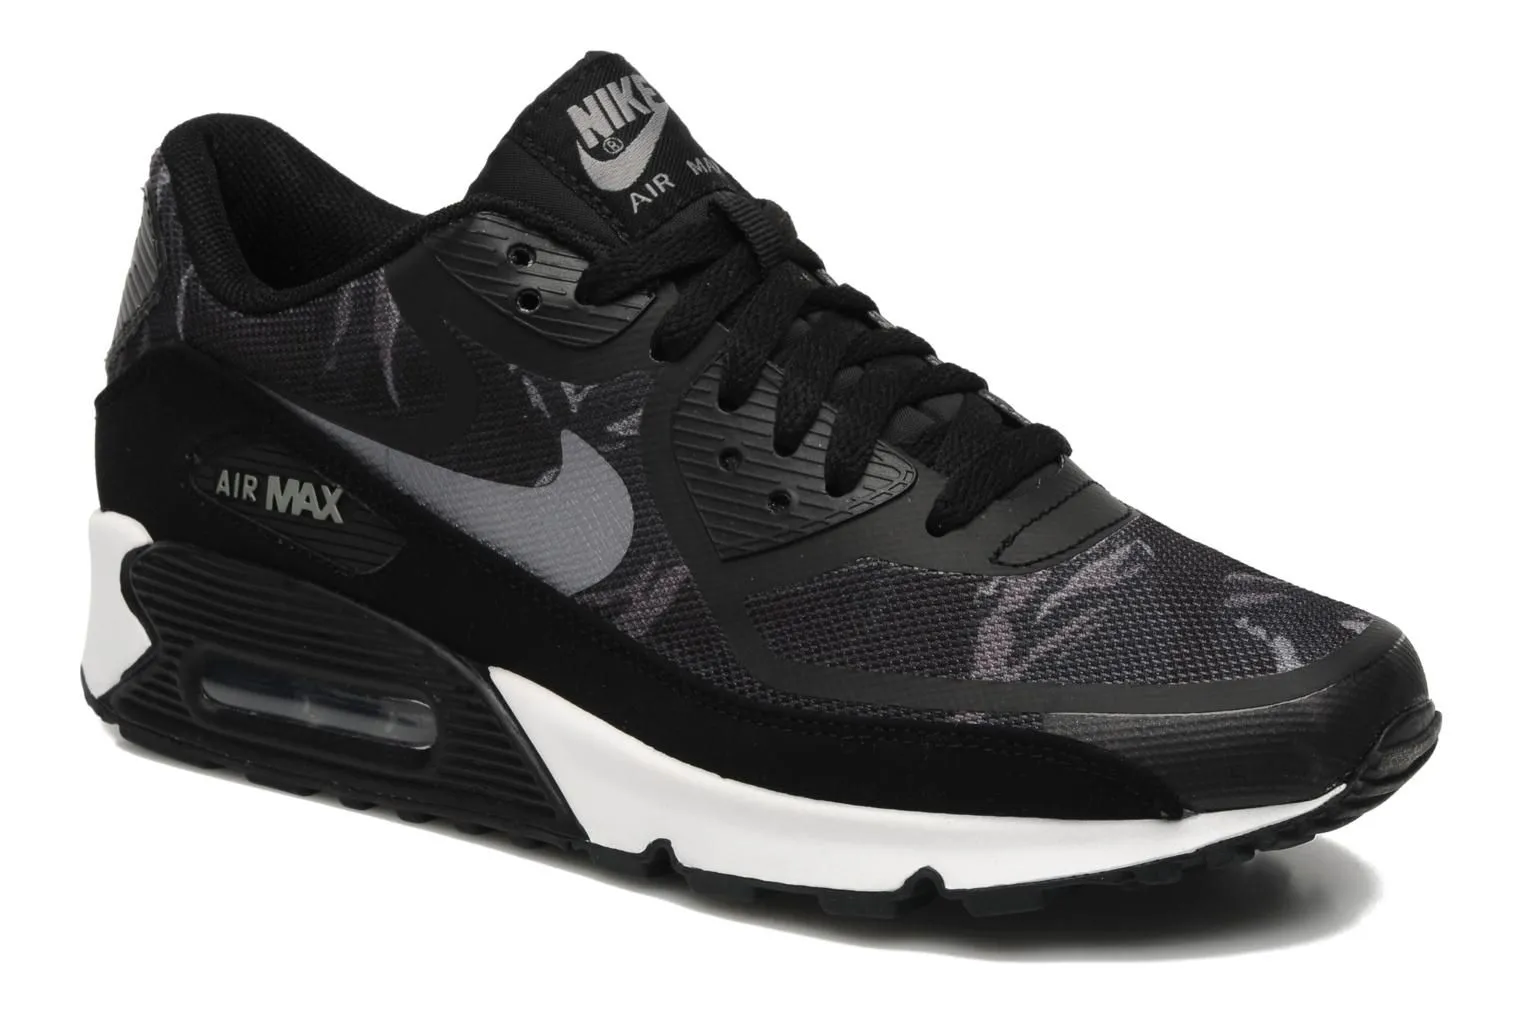 Nike Air Max 90 Hombre Botasboot Negro Carbón Oscuro Pictures to ...